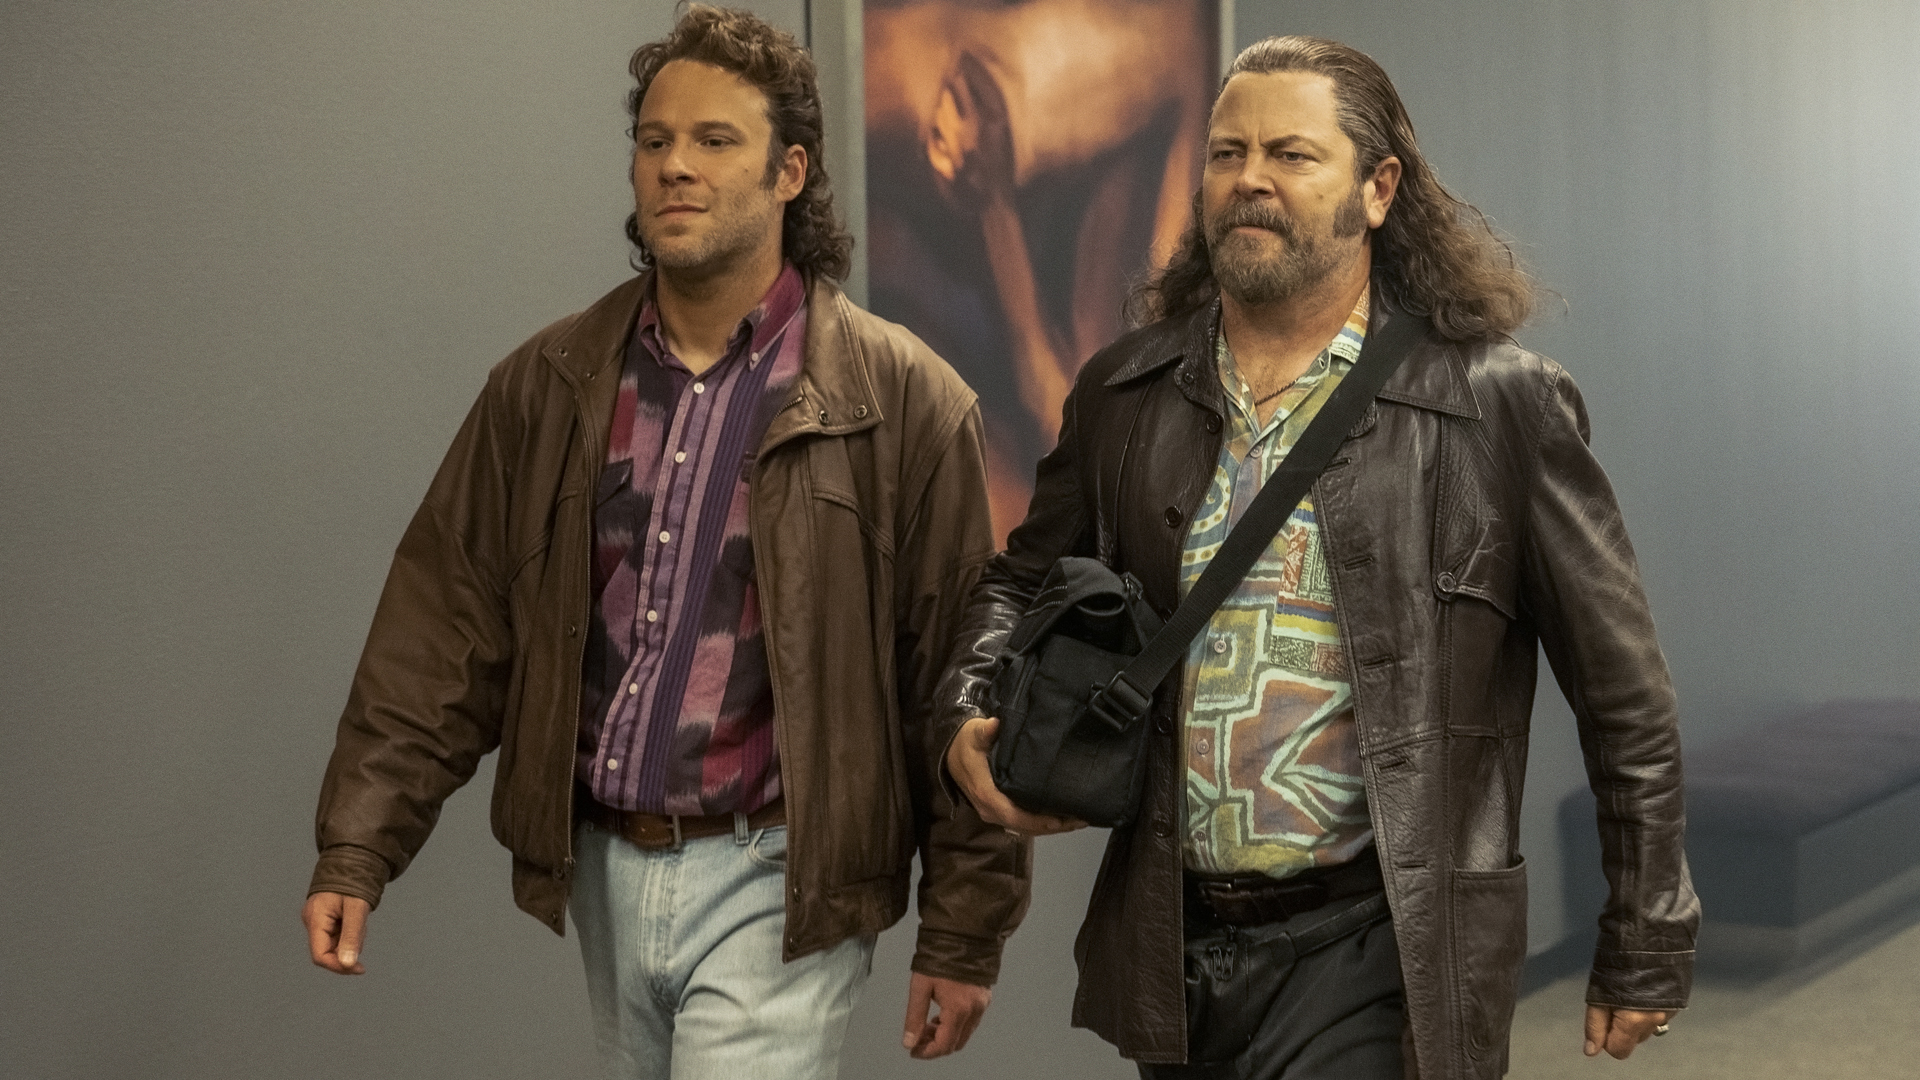 Rand Gauthier and Uncle Miltie head off to sell the sex tape in Pam and Tommy